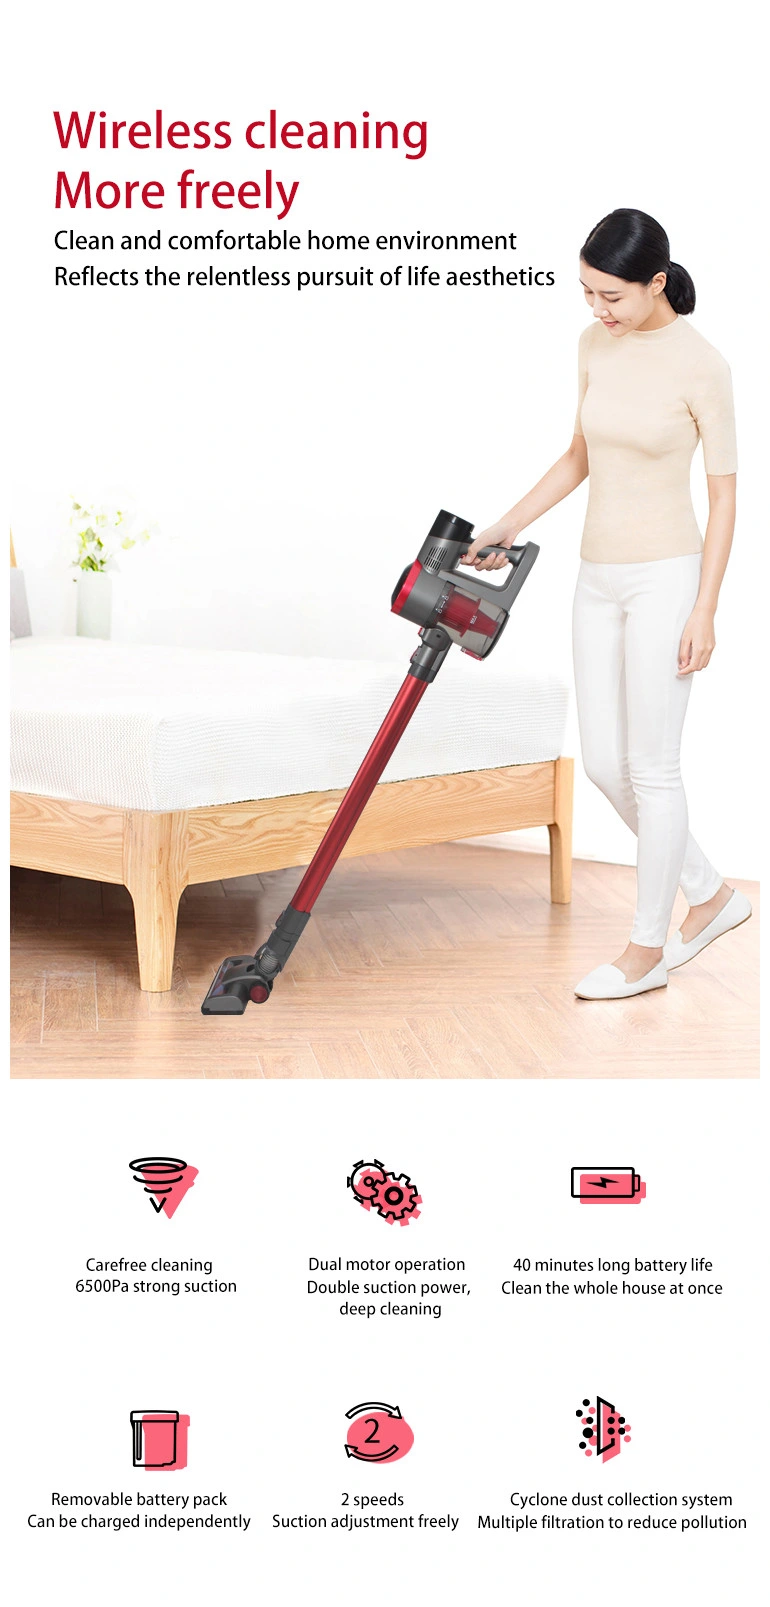 Gamana Vc1903b Professional Household Cordless Rechargeable Handheld Vacuum Cleaner for Home Use